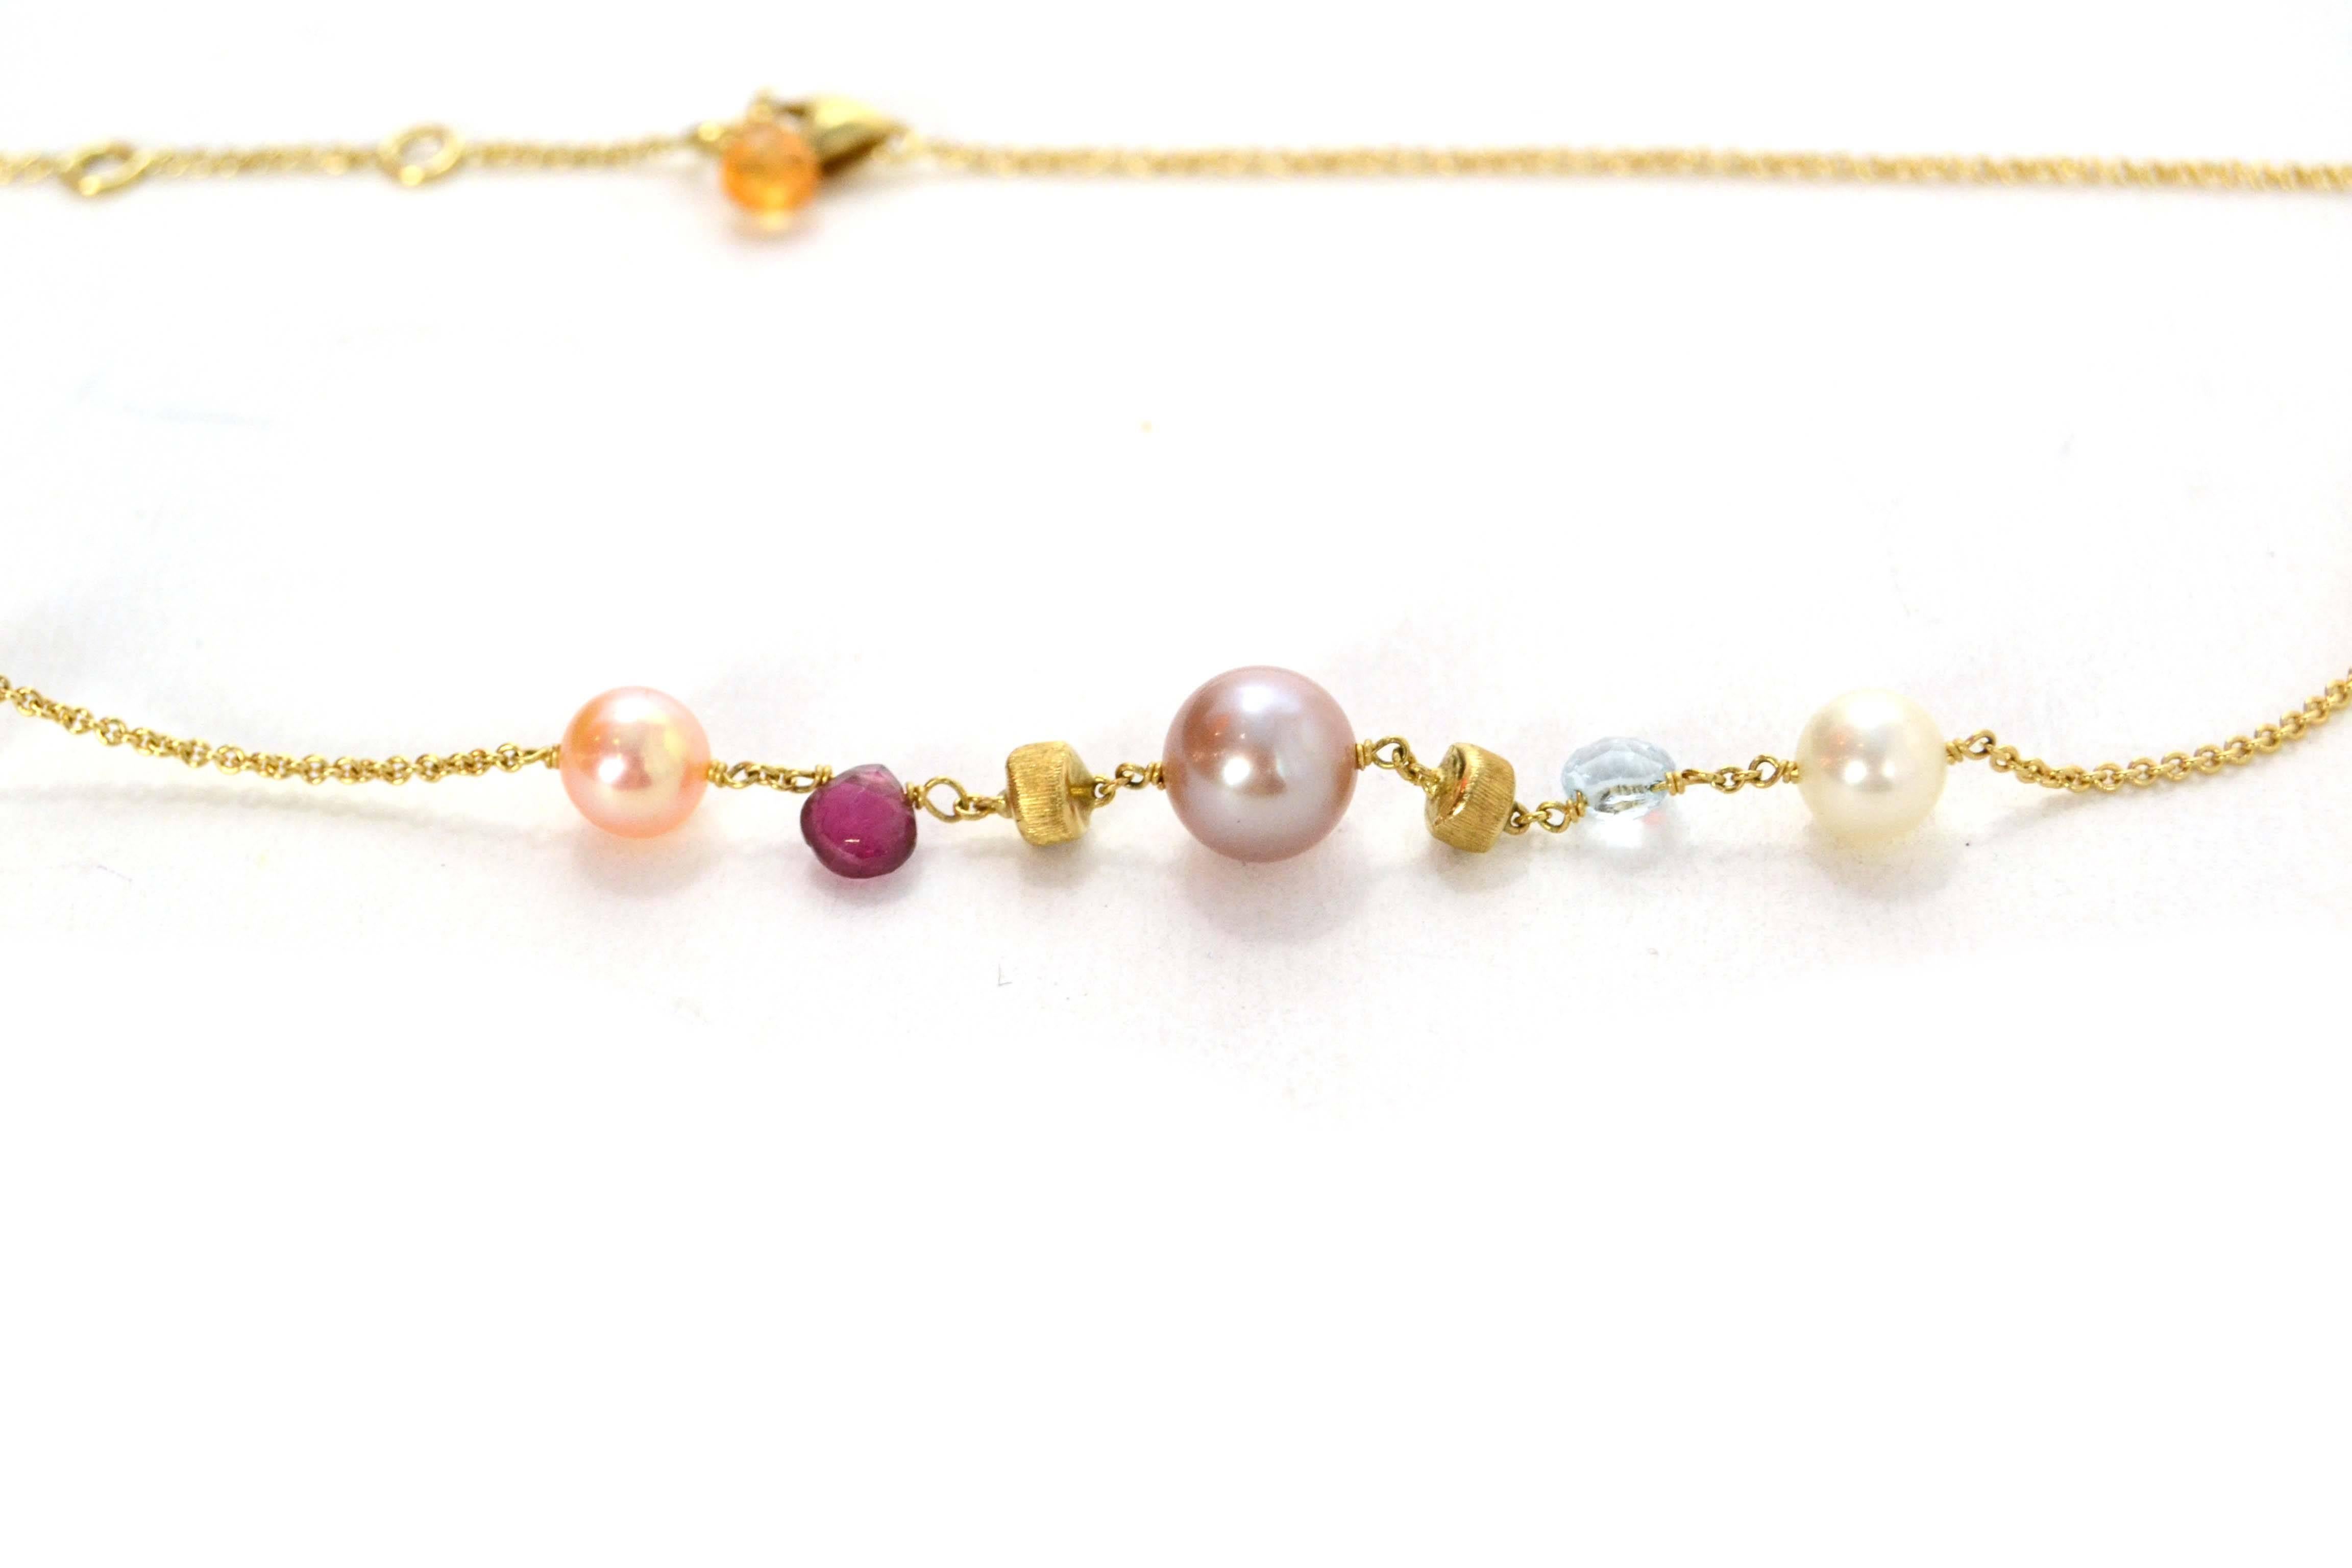 Marco Bicego Multi-Colored Stone & Pearl 18k Gold Necklace 
Features different shapes, sizes and colors of stones and pearls
Color: Gold, ivory, pink, purple, blue, orange and green
Materials: 18k gold, pearls and various stones
Closure: Lobster